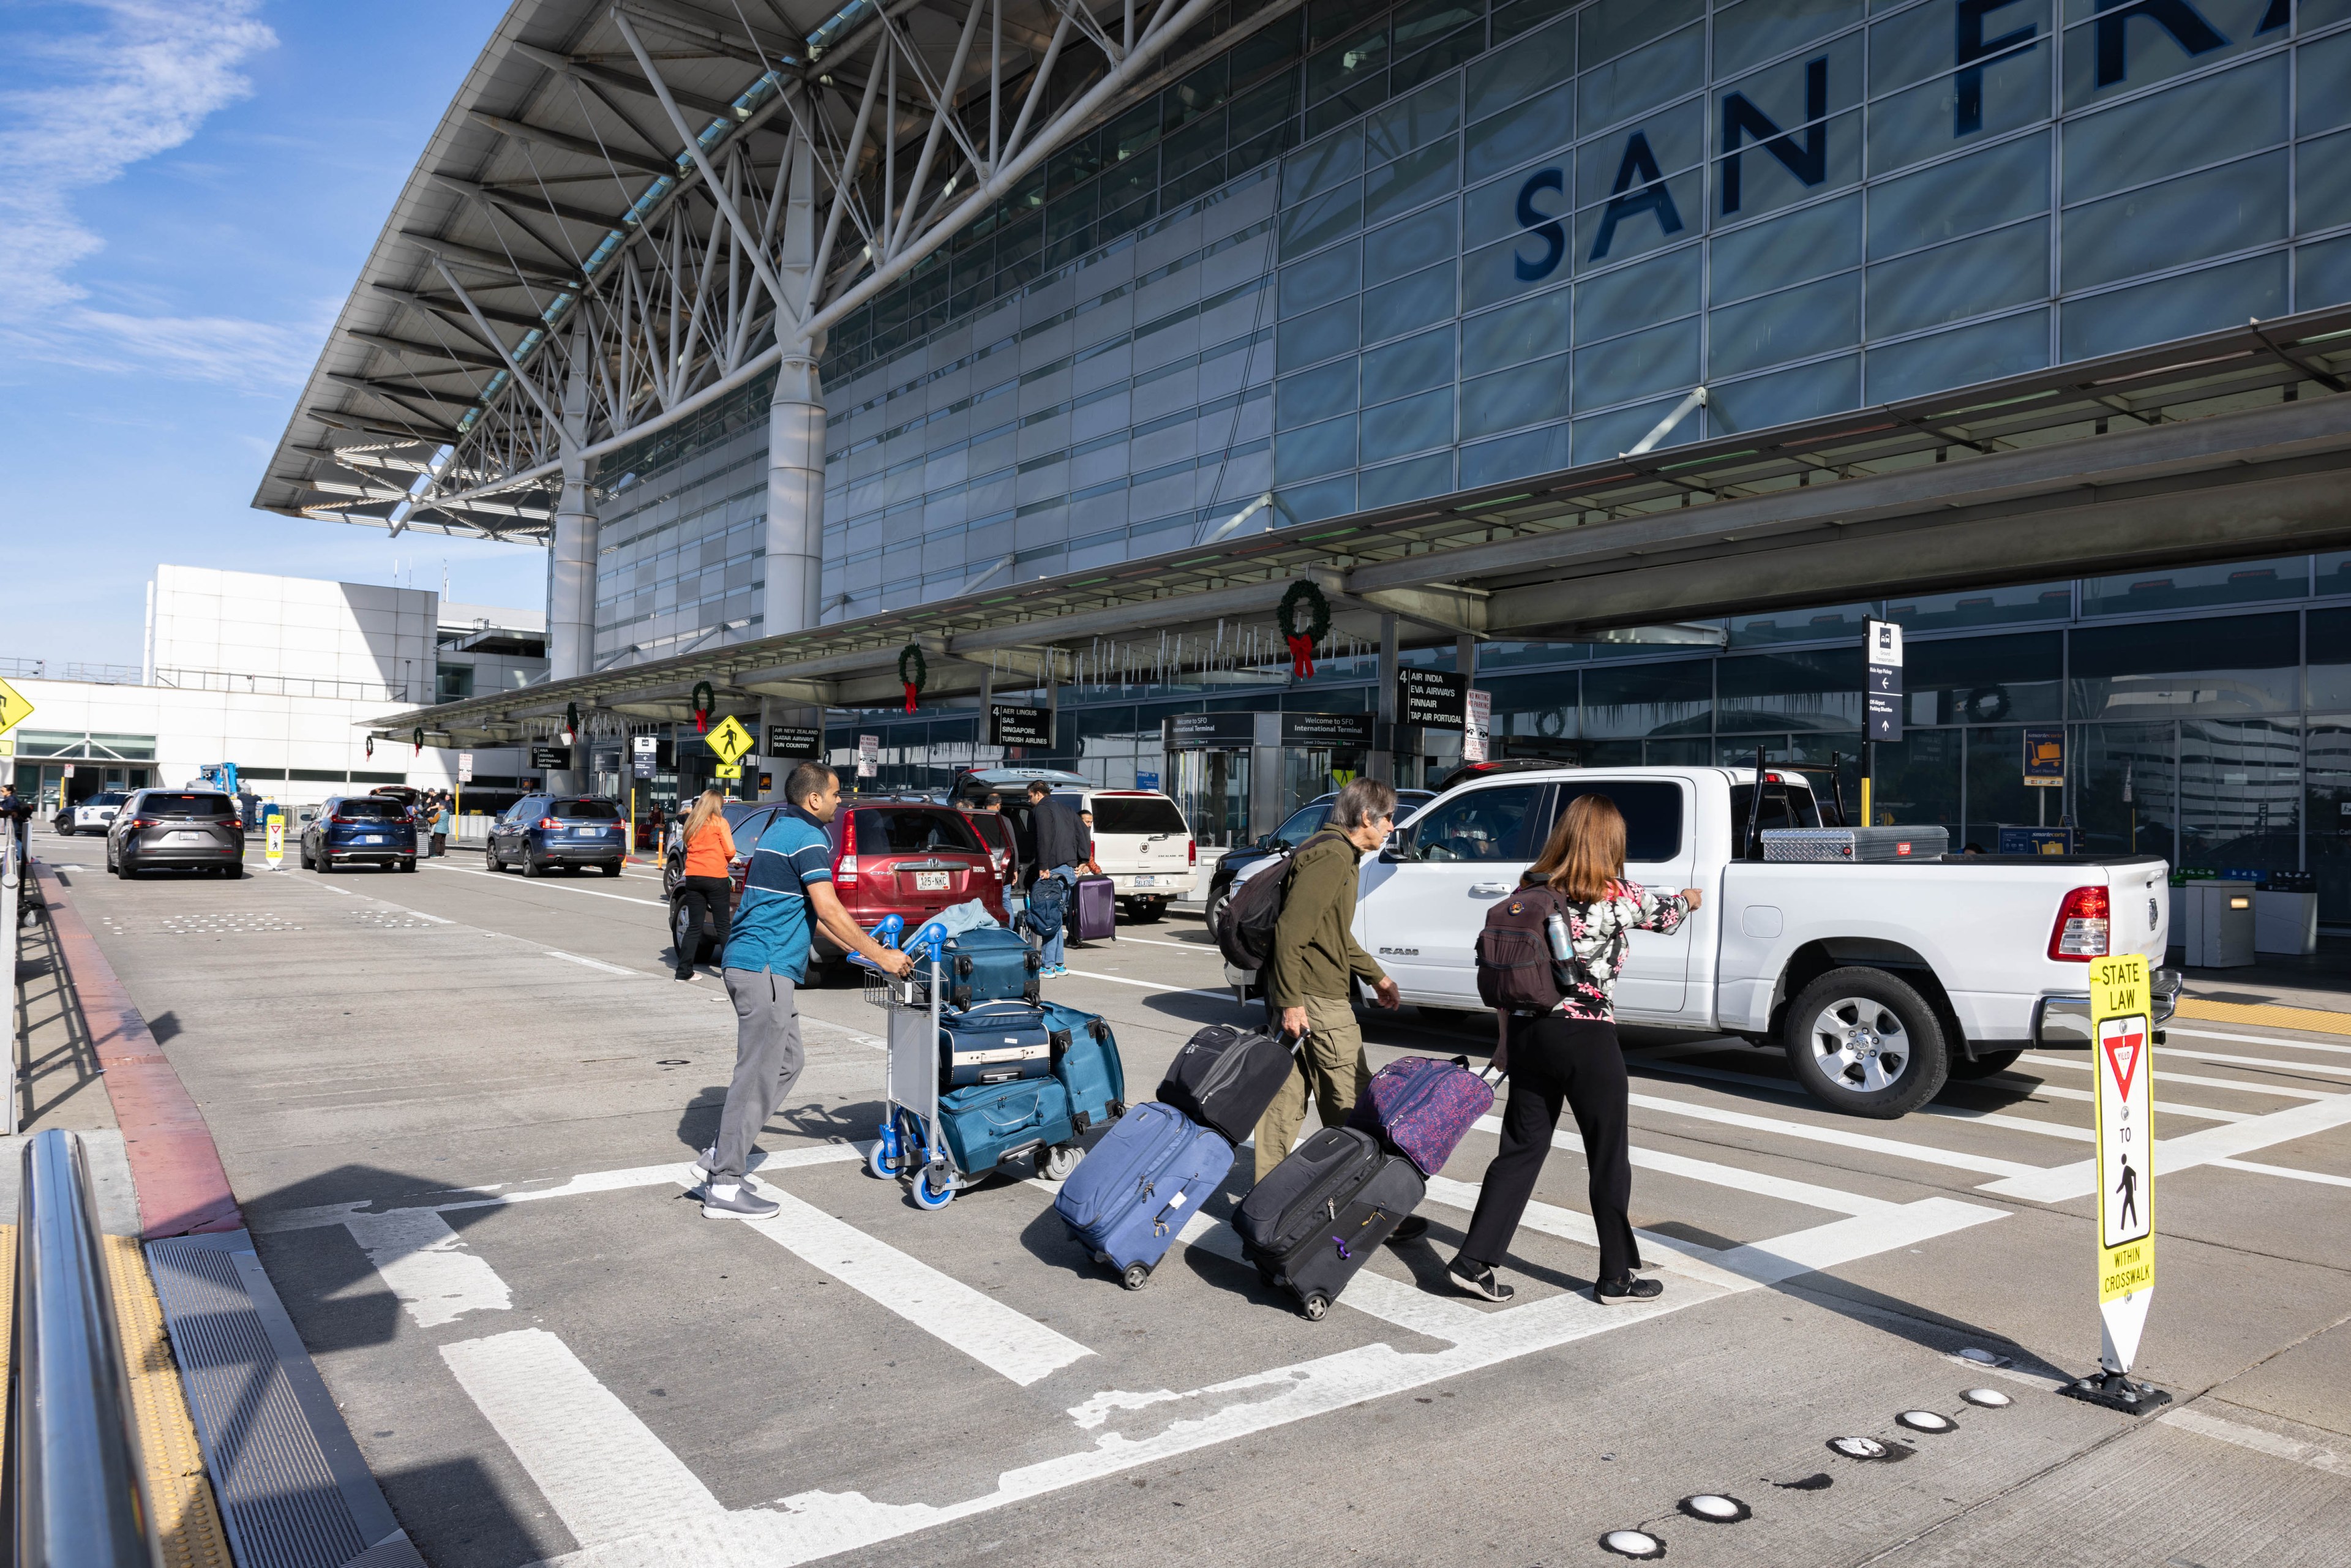 Travelers haul their luggage on a crosswalk outside an airport terminal.